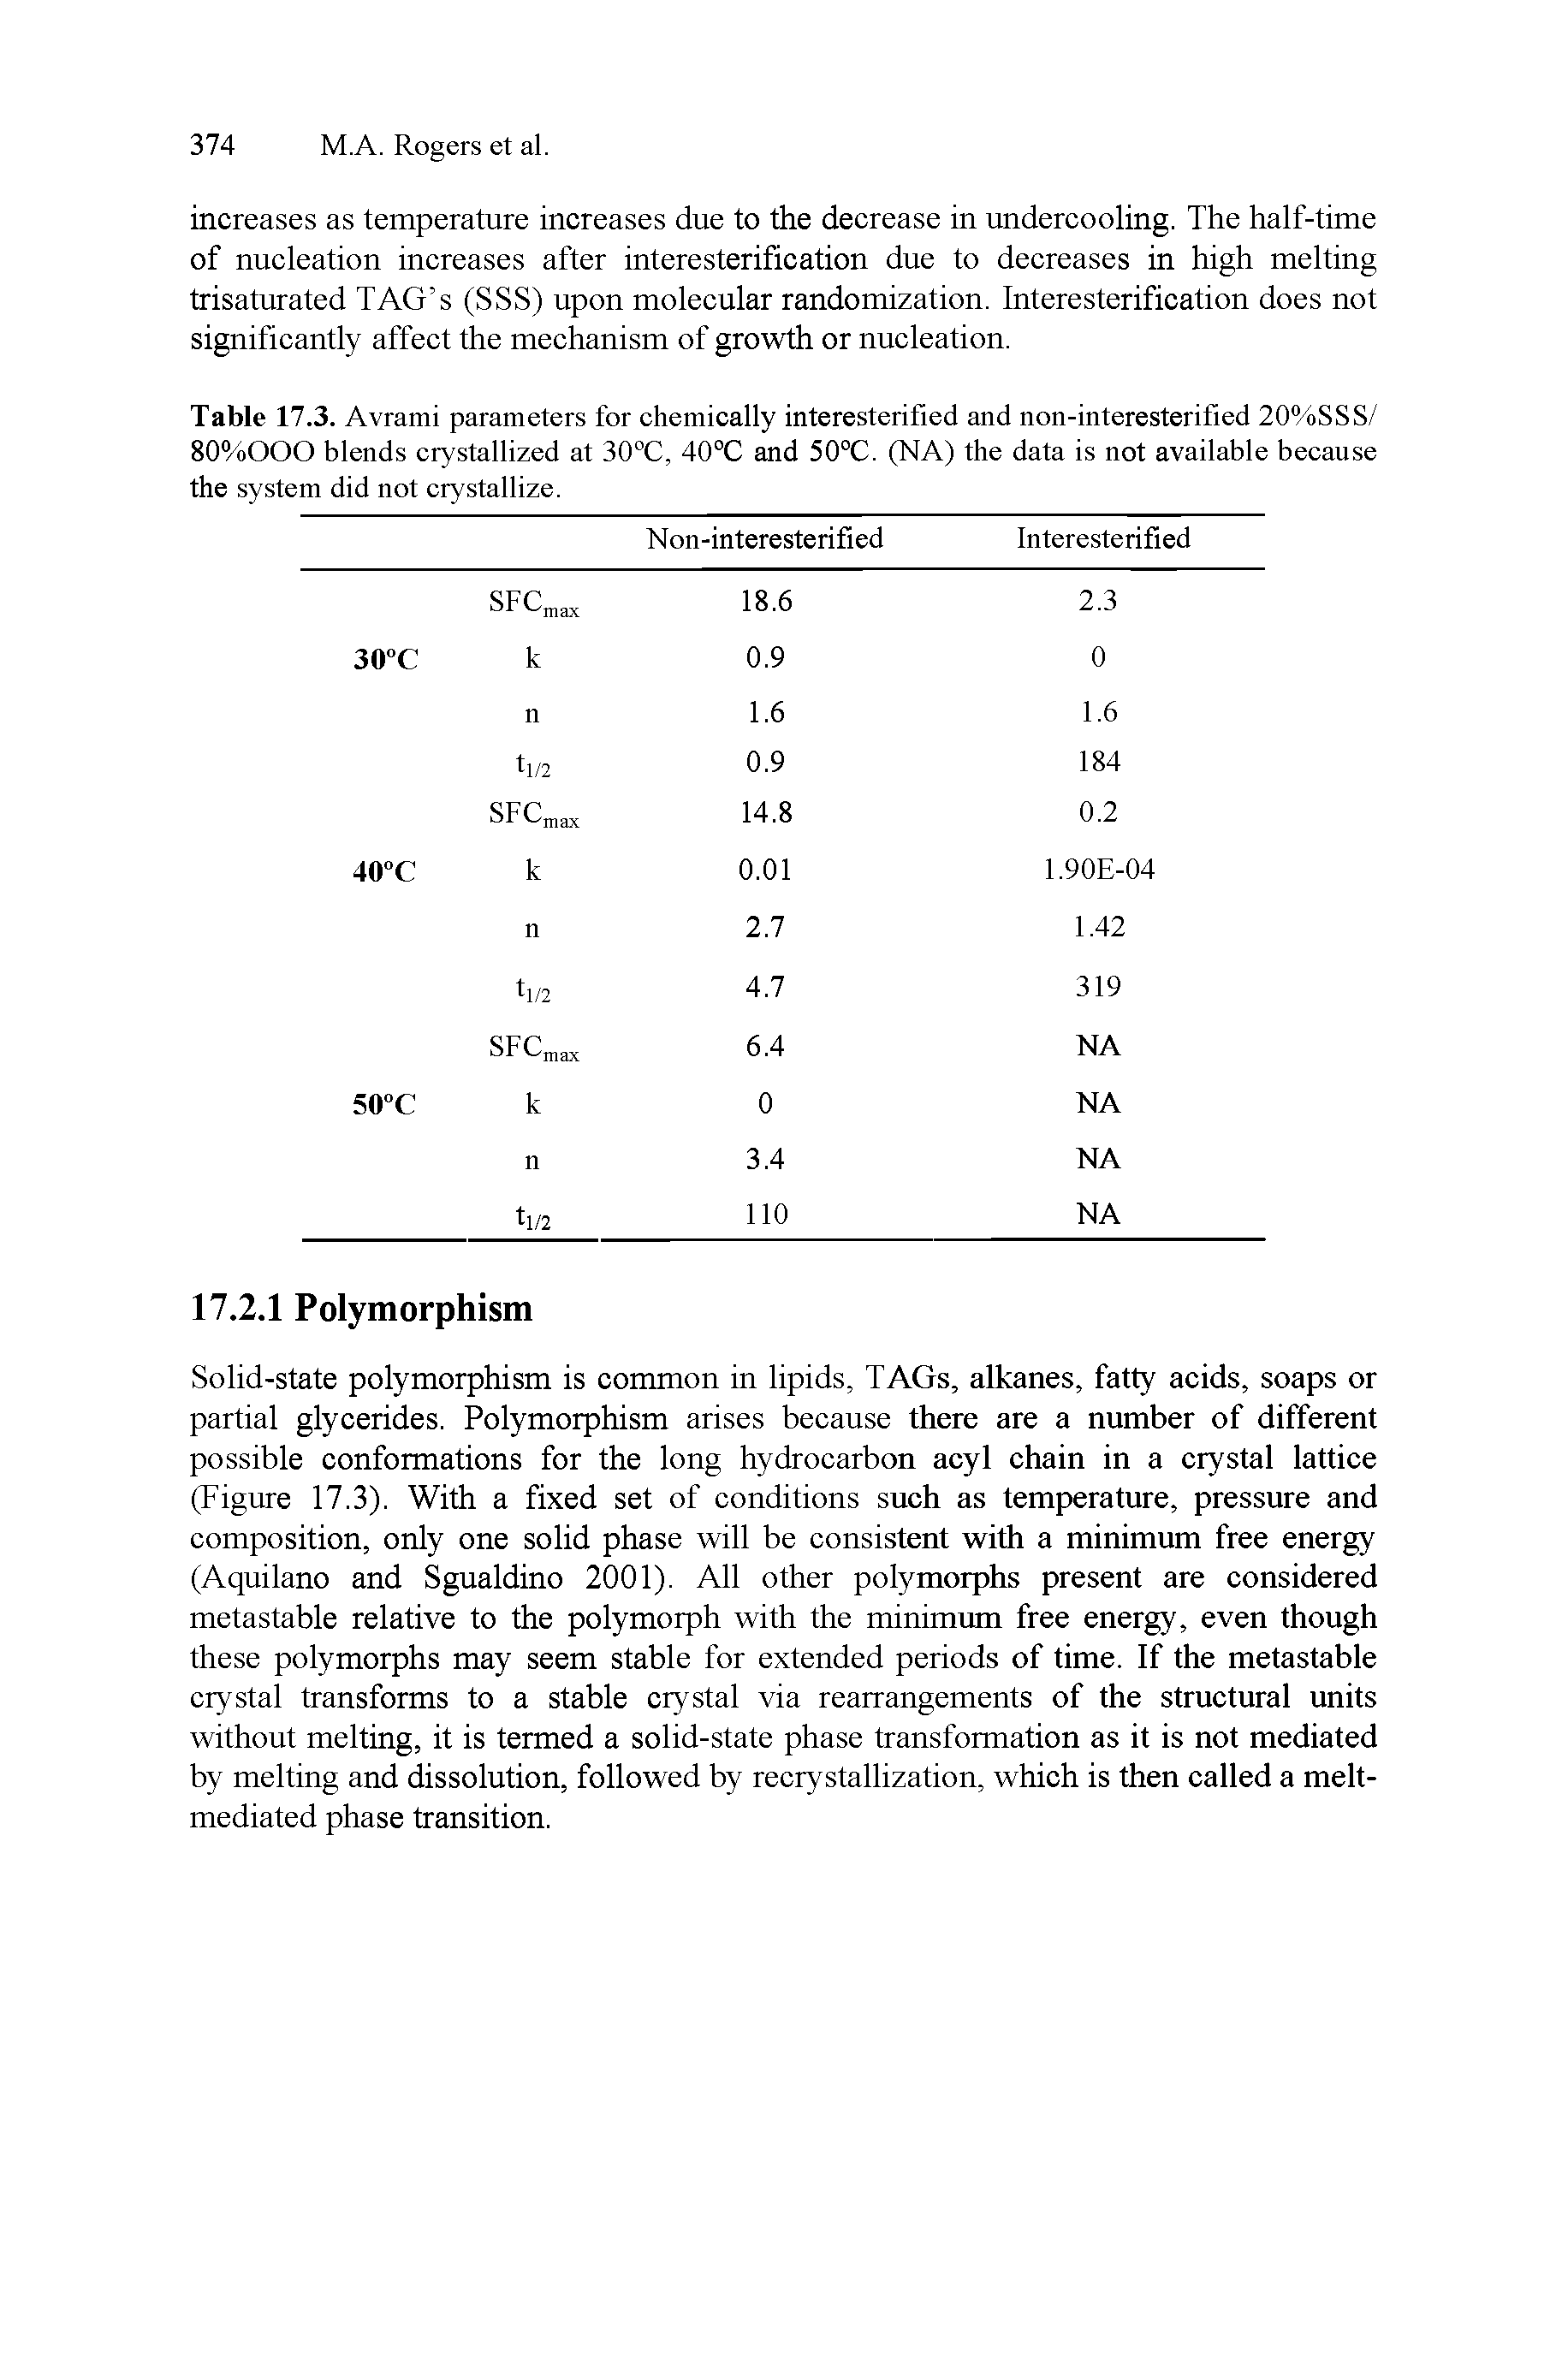 Table 17.3. Avrami parameters for ehemically interesterified and non-interesterified 20%SSS/ 80%OOO blends crystallized at 30°C, 40°C and 50°C. (NA) the data is not available because the system did not crystallize.